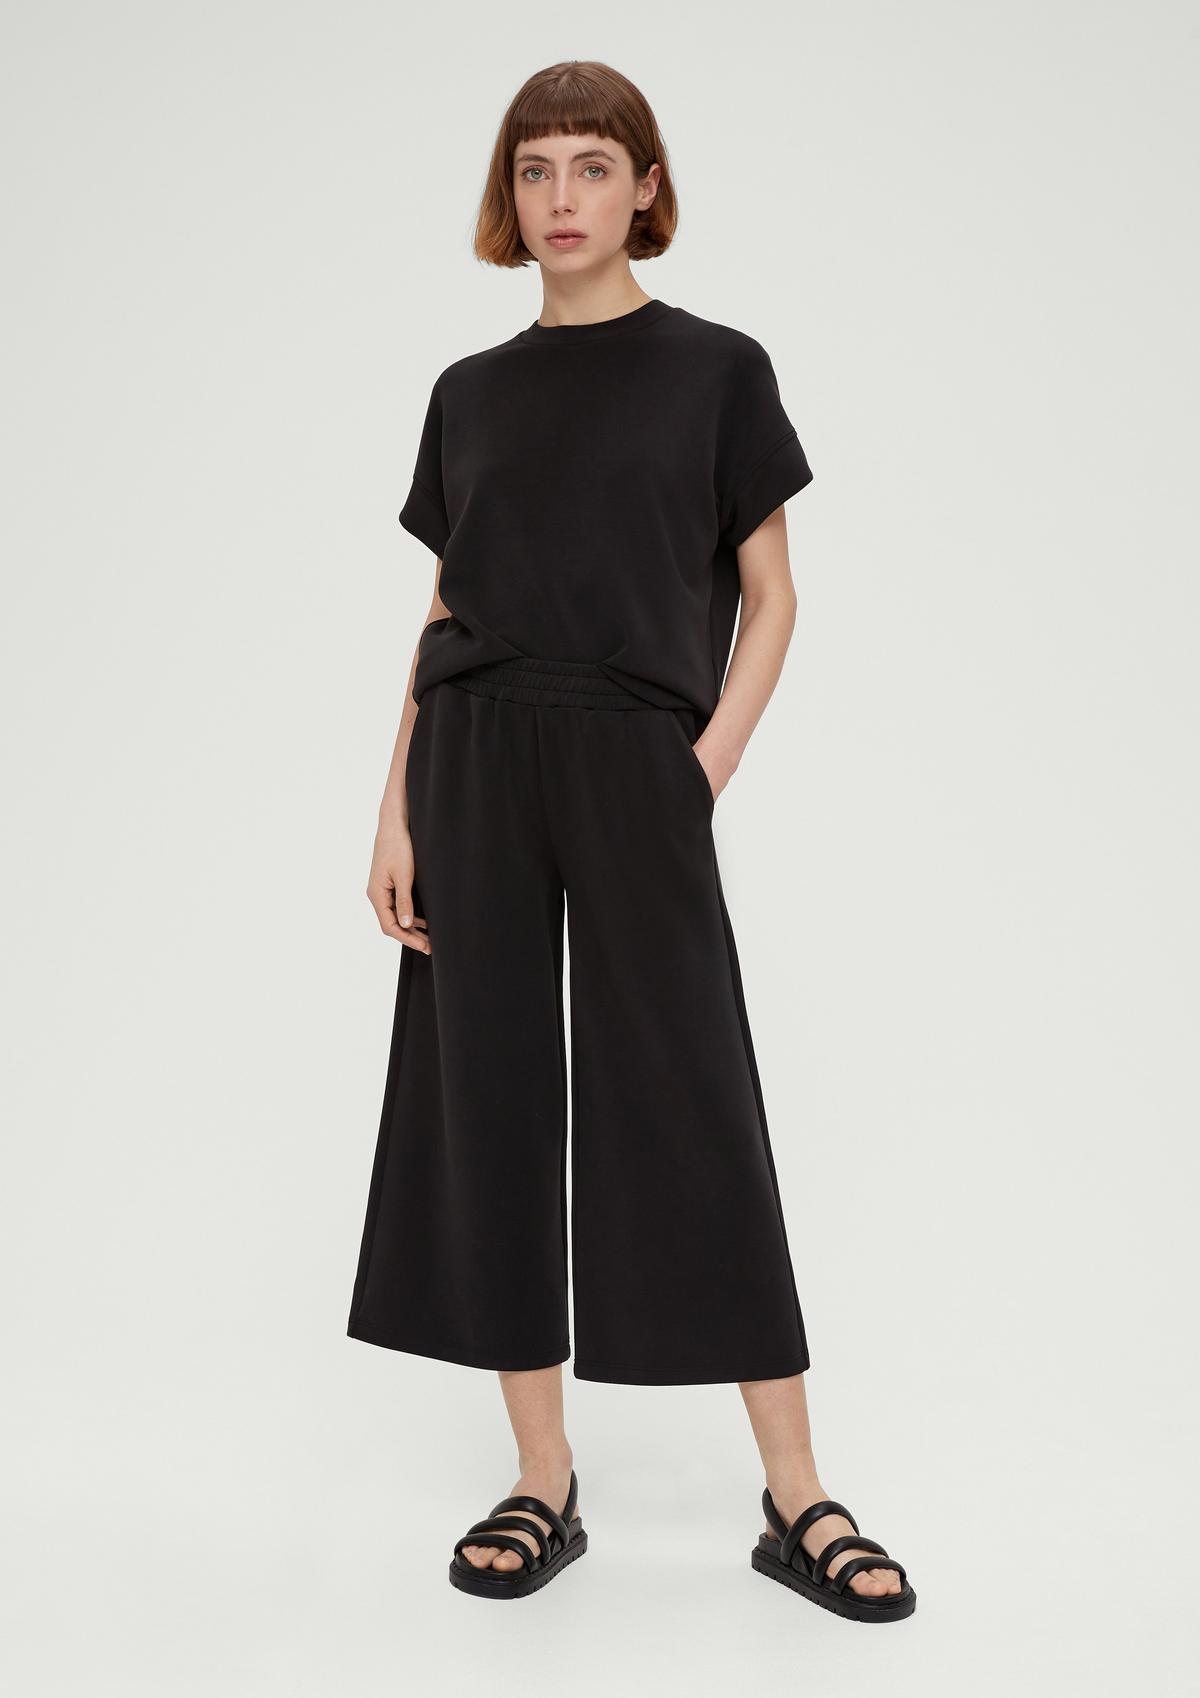 the Order online Culottes: now shop in